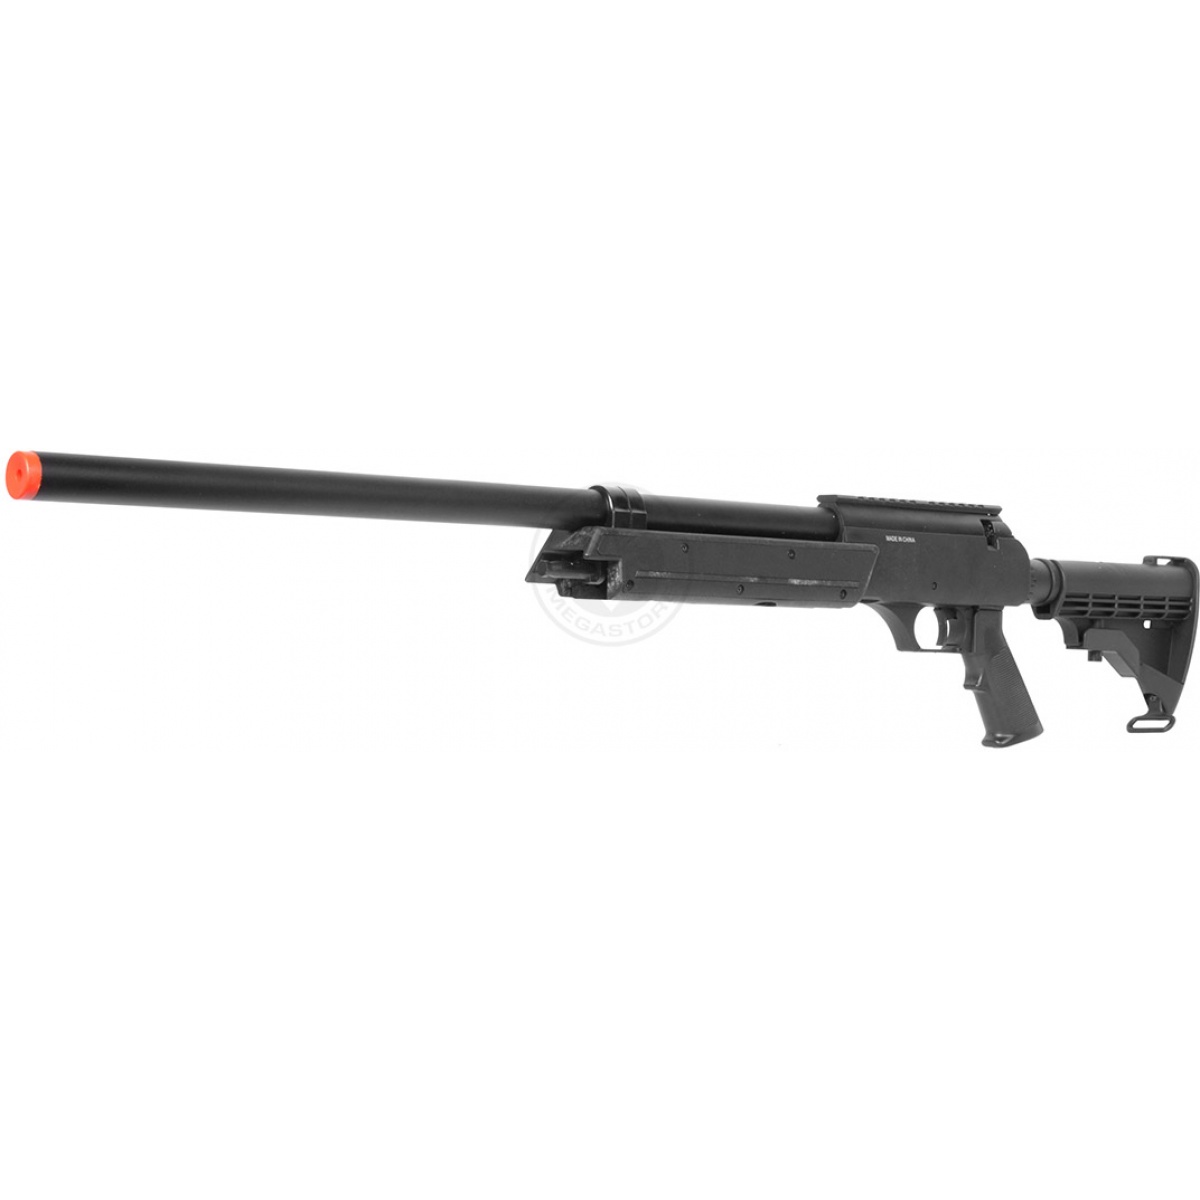 WELL MB06D ASR SR2 M187 Airsoft Bolt Action Sniper Rifle With